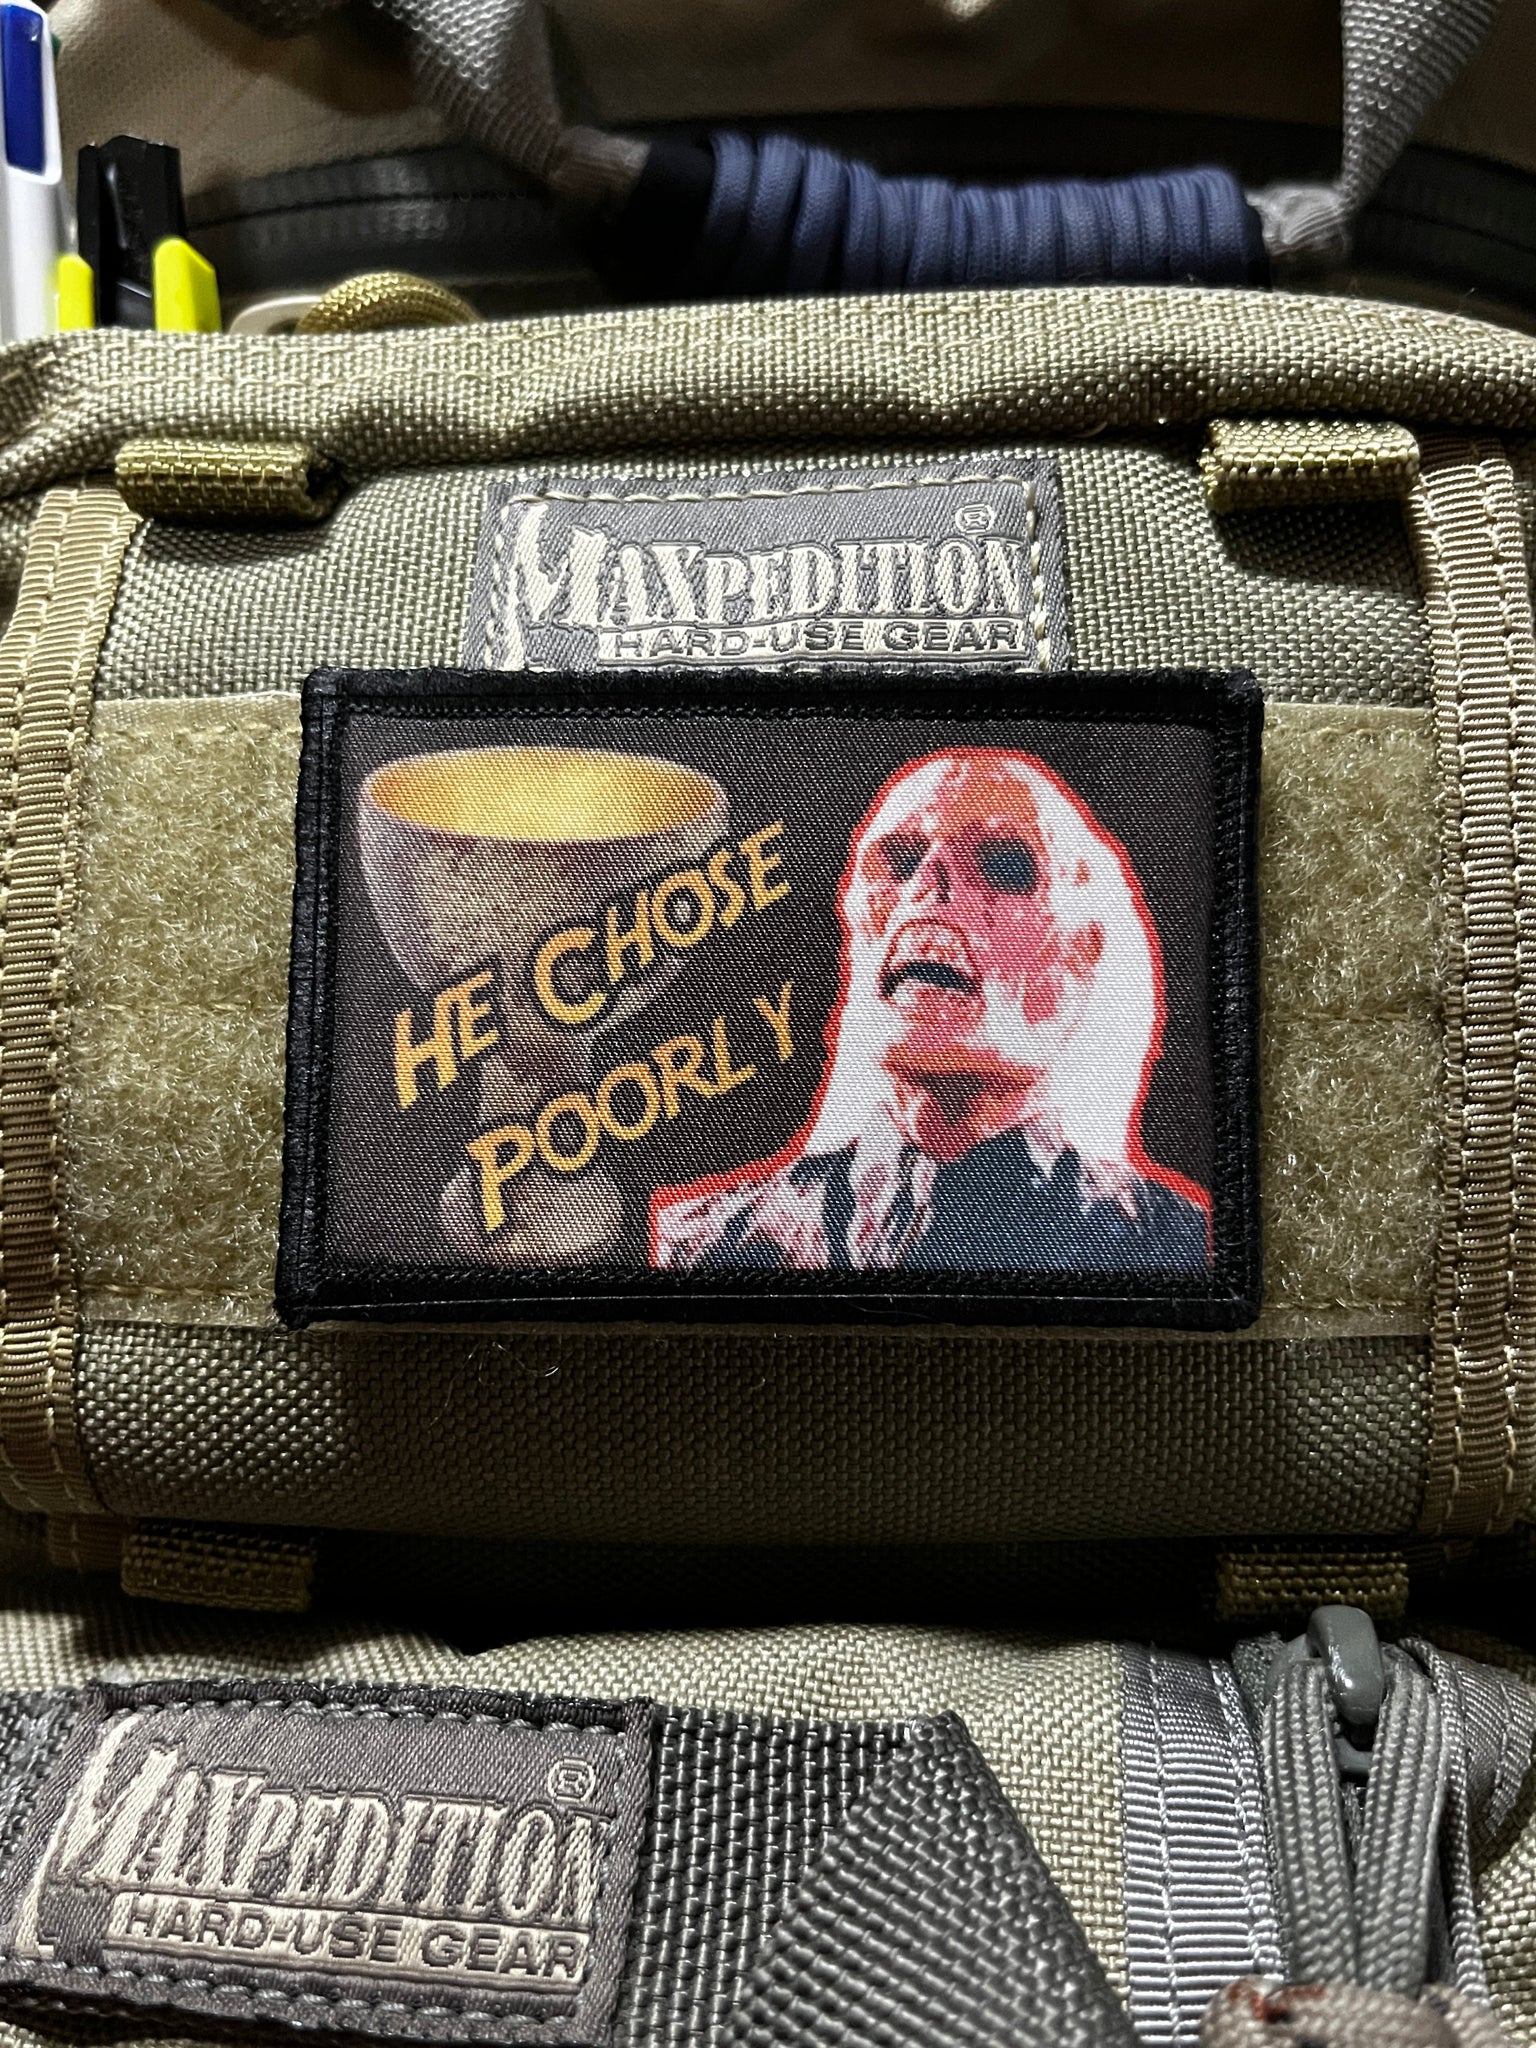 Indiana Jones He Chose Poorly Raiders of the Lost Ark Morale Patch ...